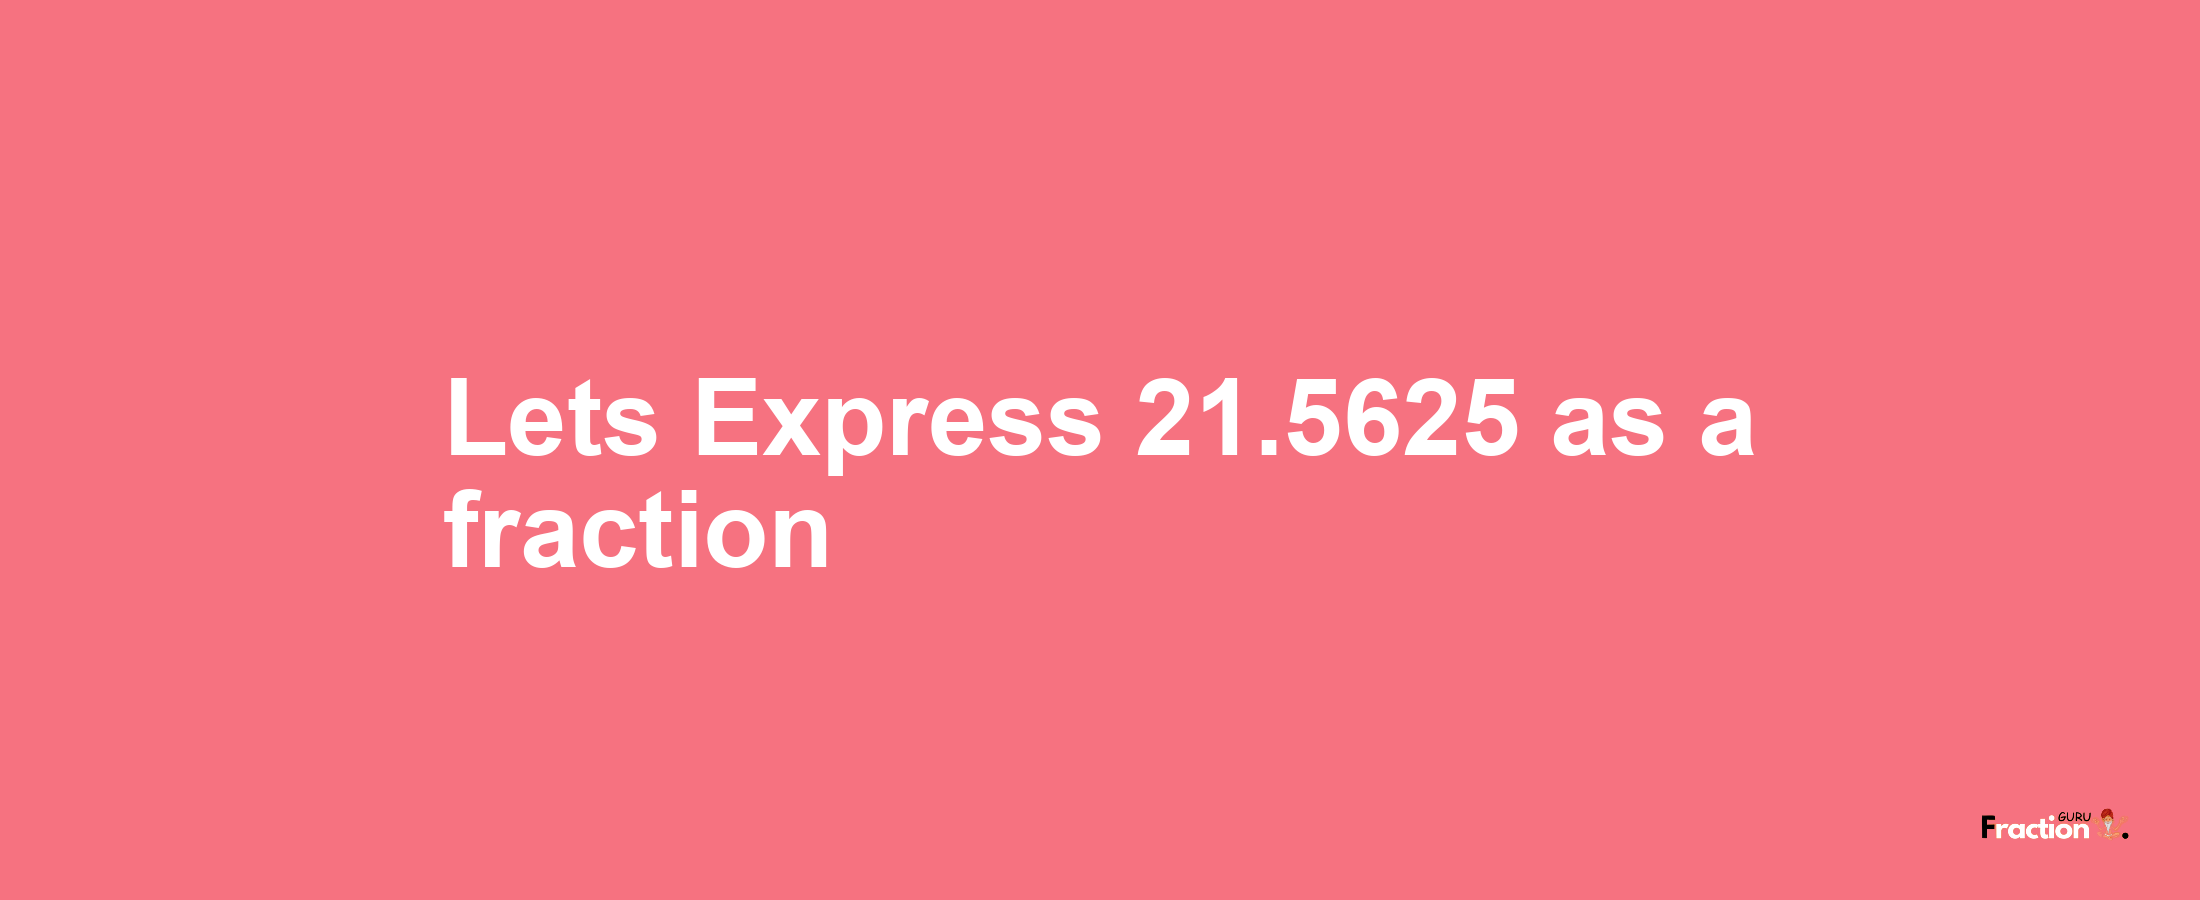 Lets Express 21.5625 as afraction